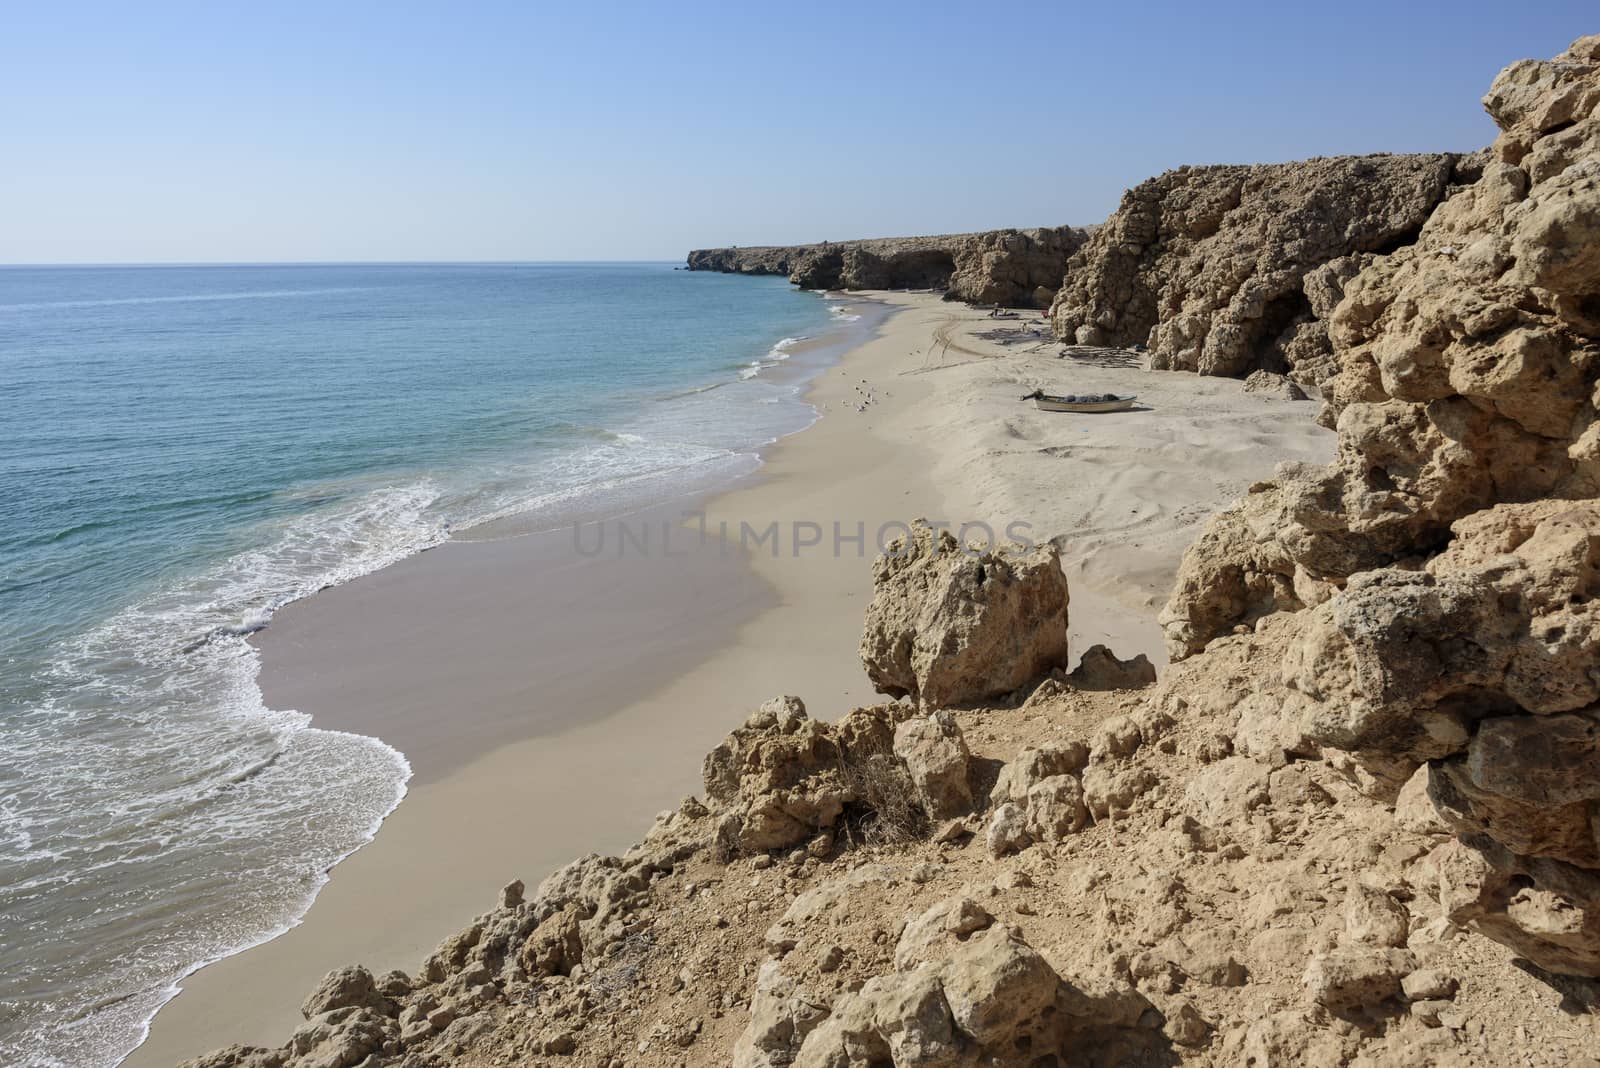 Wild beach at the coat of Ras Al Jinz, Sultanate of Oman.Fishermen of the nearest village use it as a fish harbor